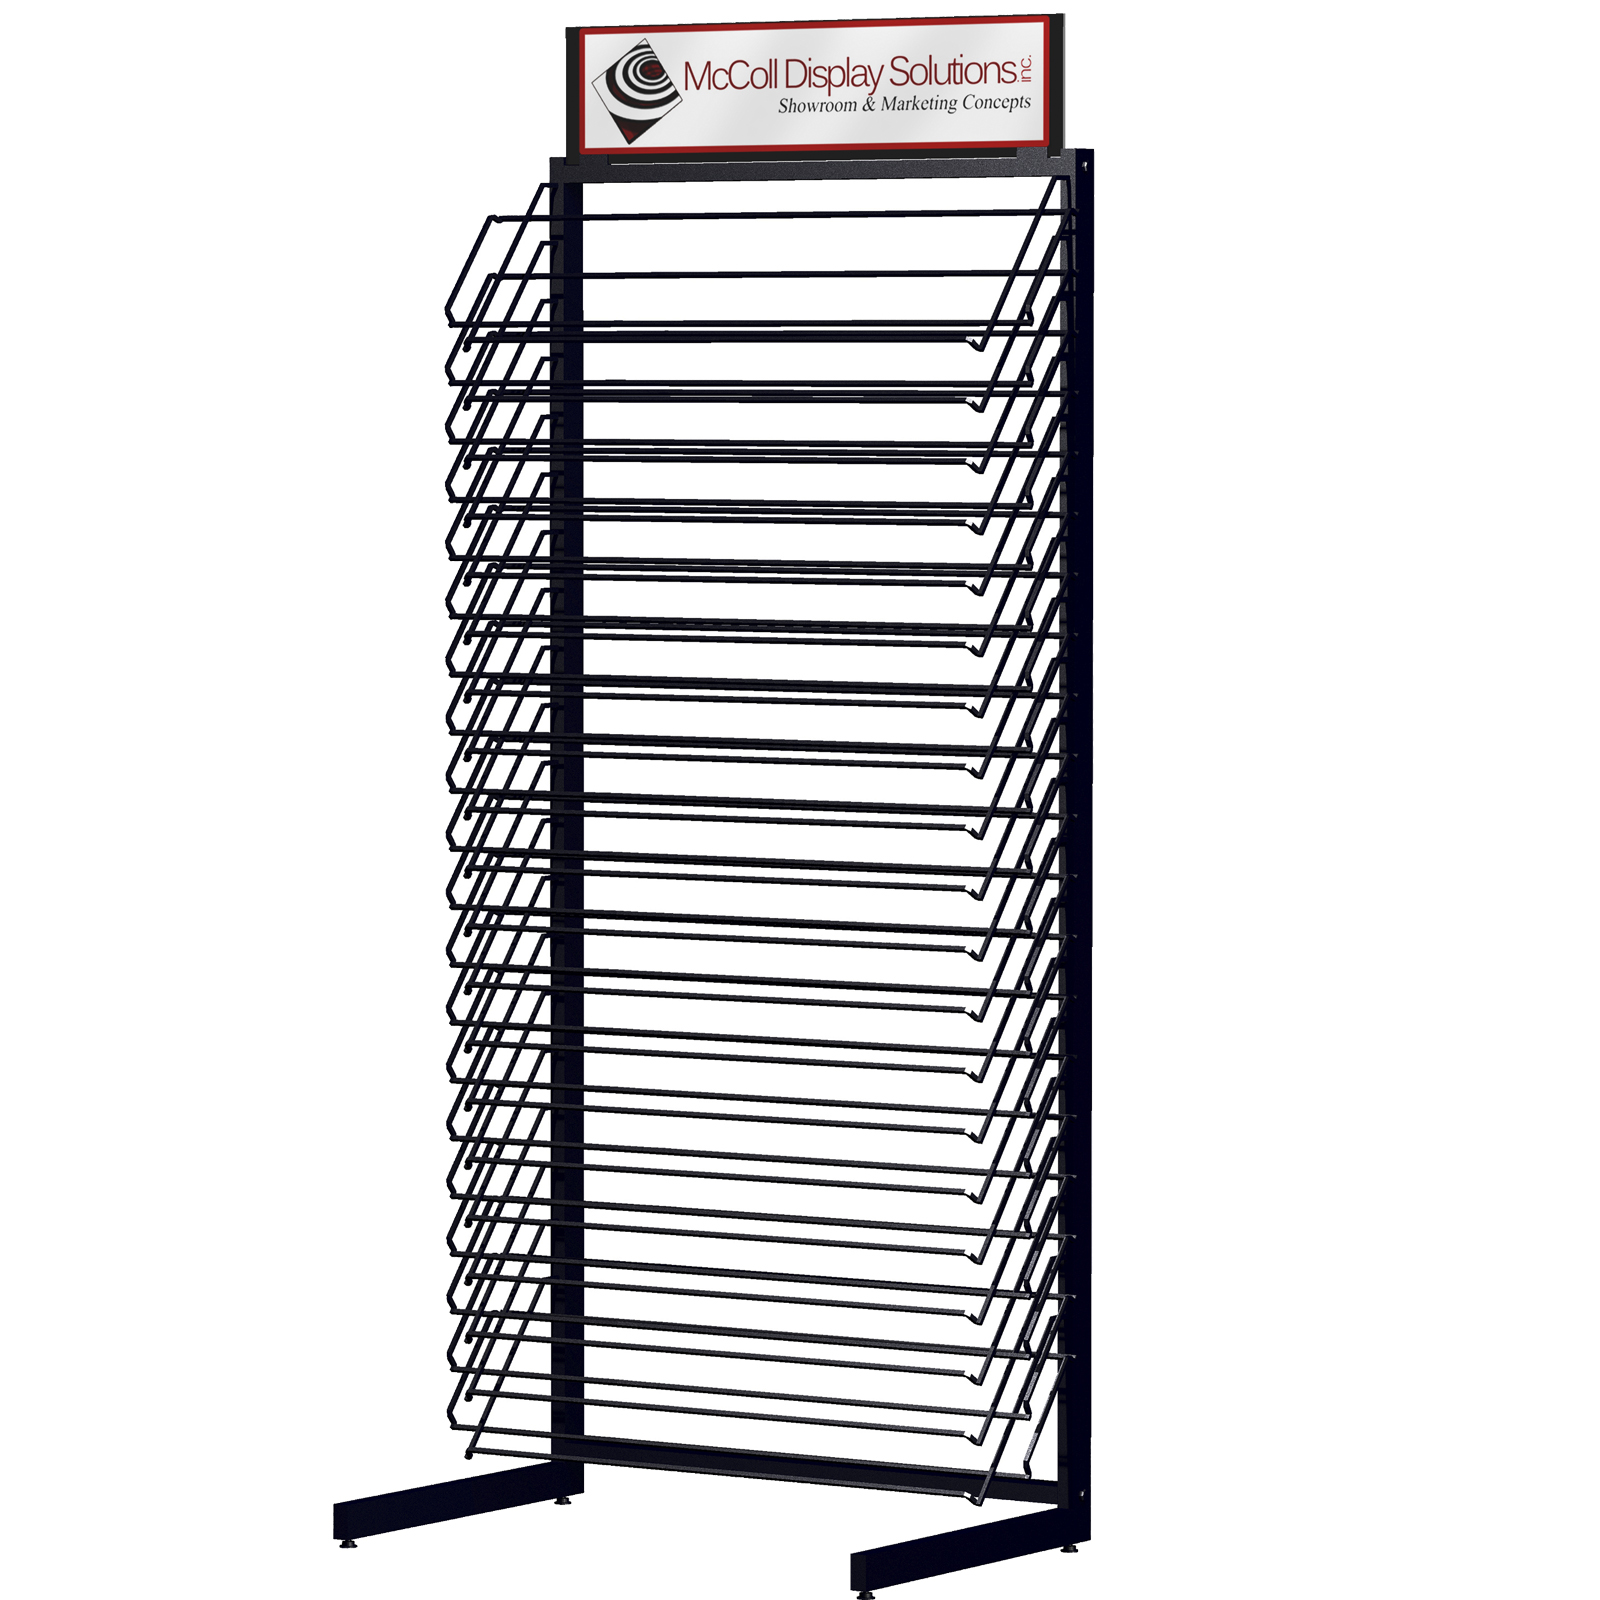 CD60 Tower Tubular Steel Construction Customize Colors and Custom Screen Printed or Full Color Signage Available